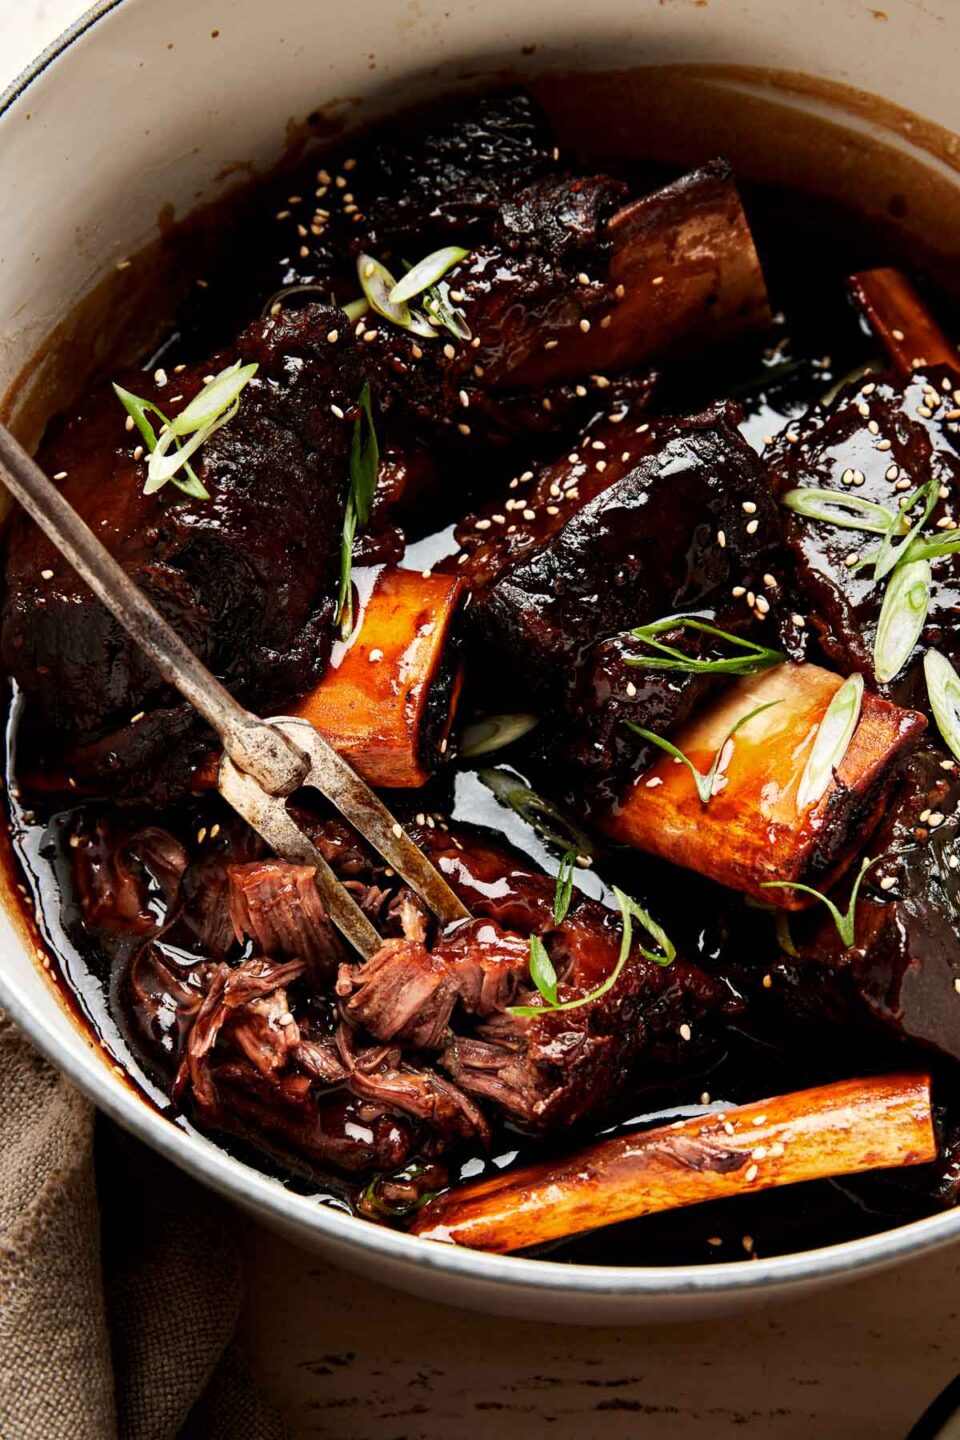 A close-up shot of a two-pronged serving fork shredding a soy-braised short rib in a white pot full of braised ribs and thickened braising liquid garnished with green onions and sesame seeds.